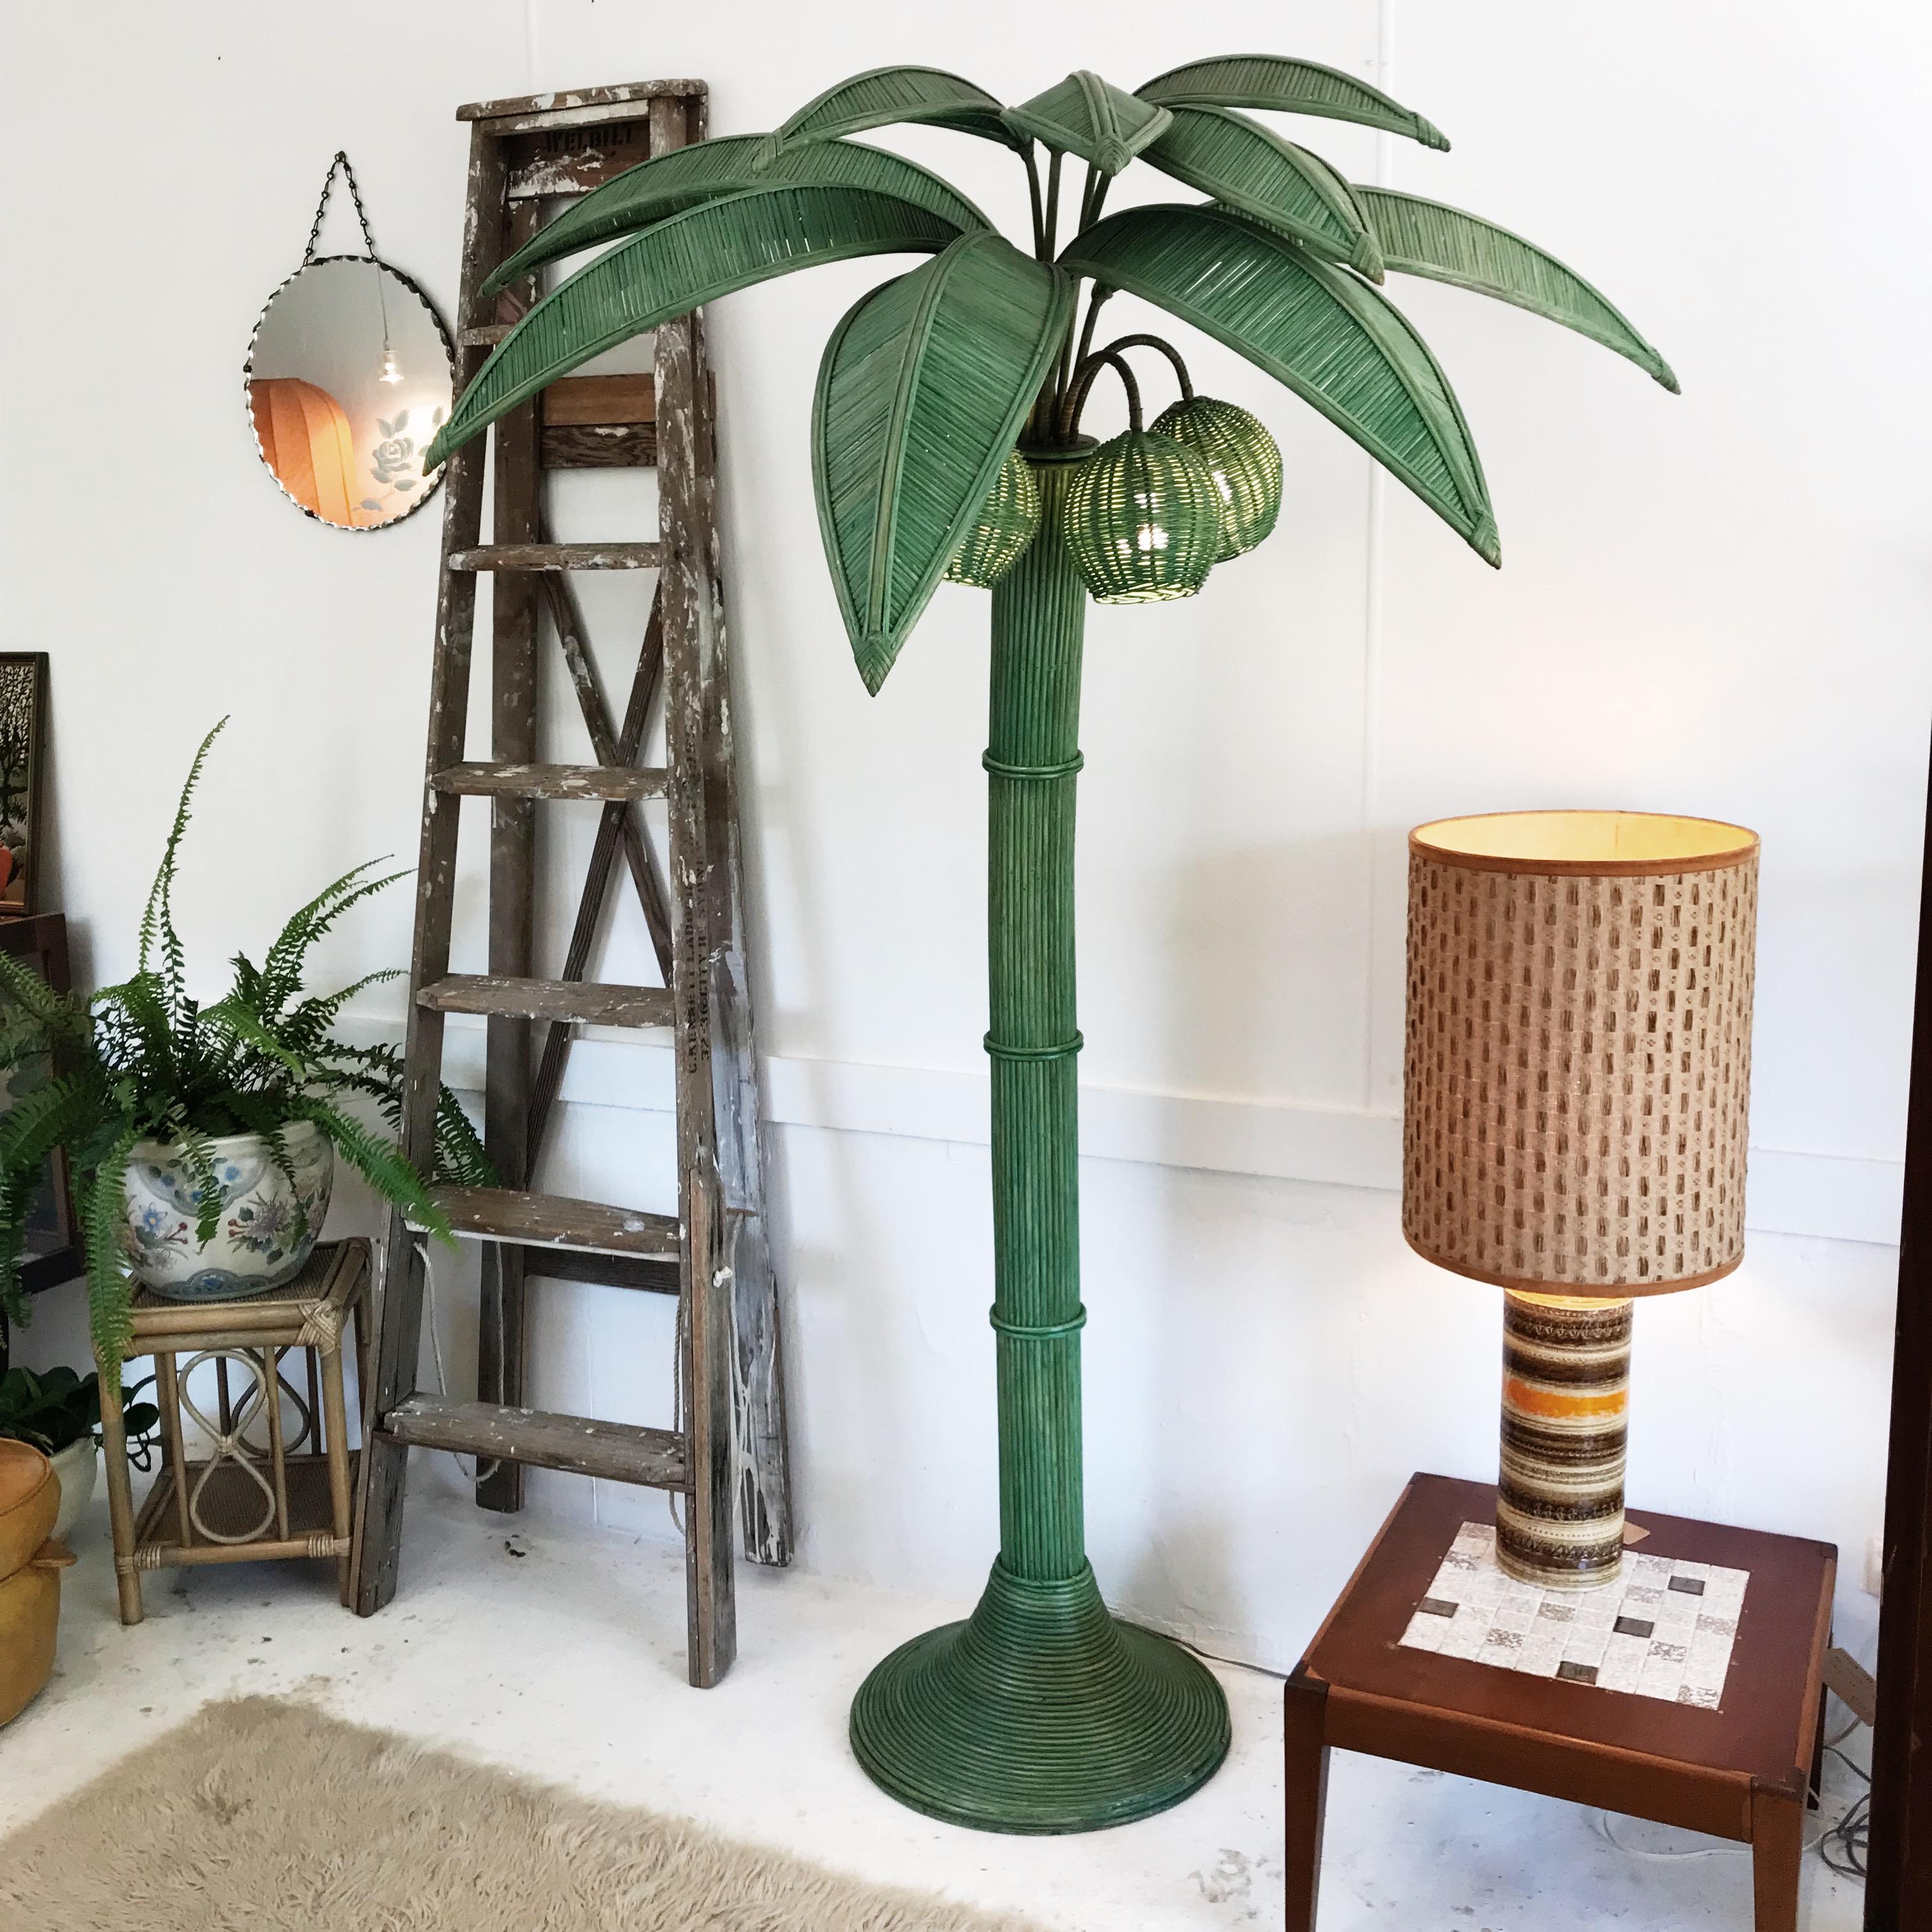 Original vintage wicker rattan palm tree floor lamp by Mario Lopez Torres. Gorgeous lines and timeless design, this floor lamp serves equally well as a subtle environmental and decorative piece as it does as a crowd pleasing, show stopping